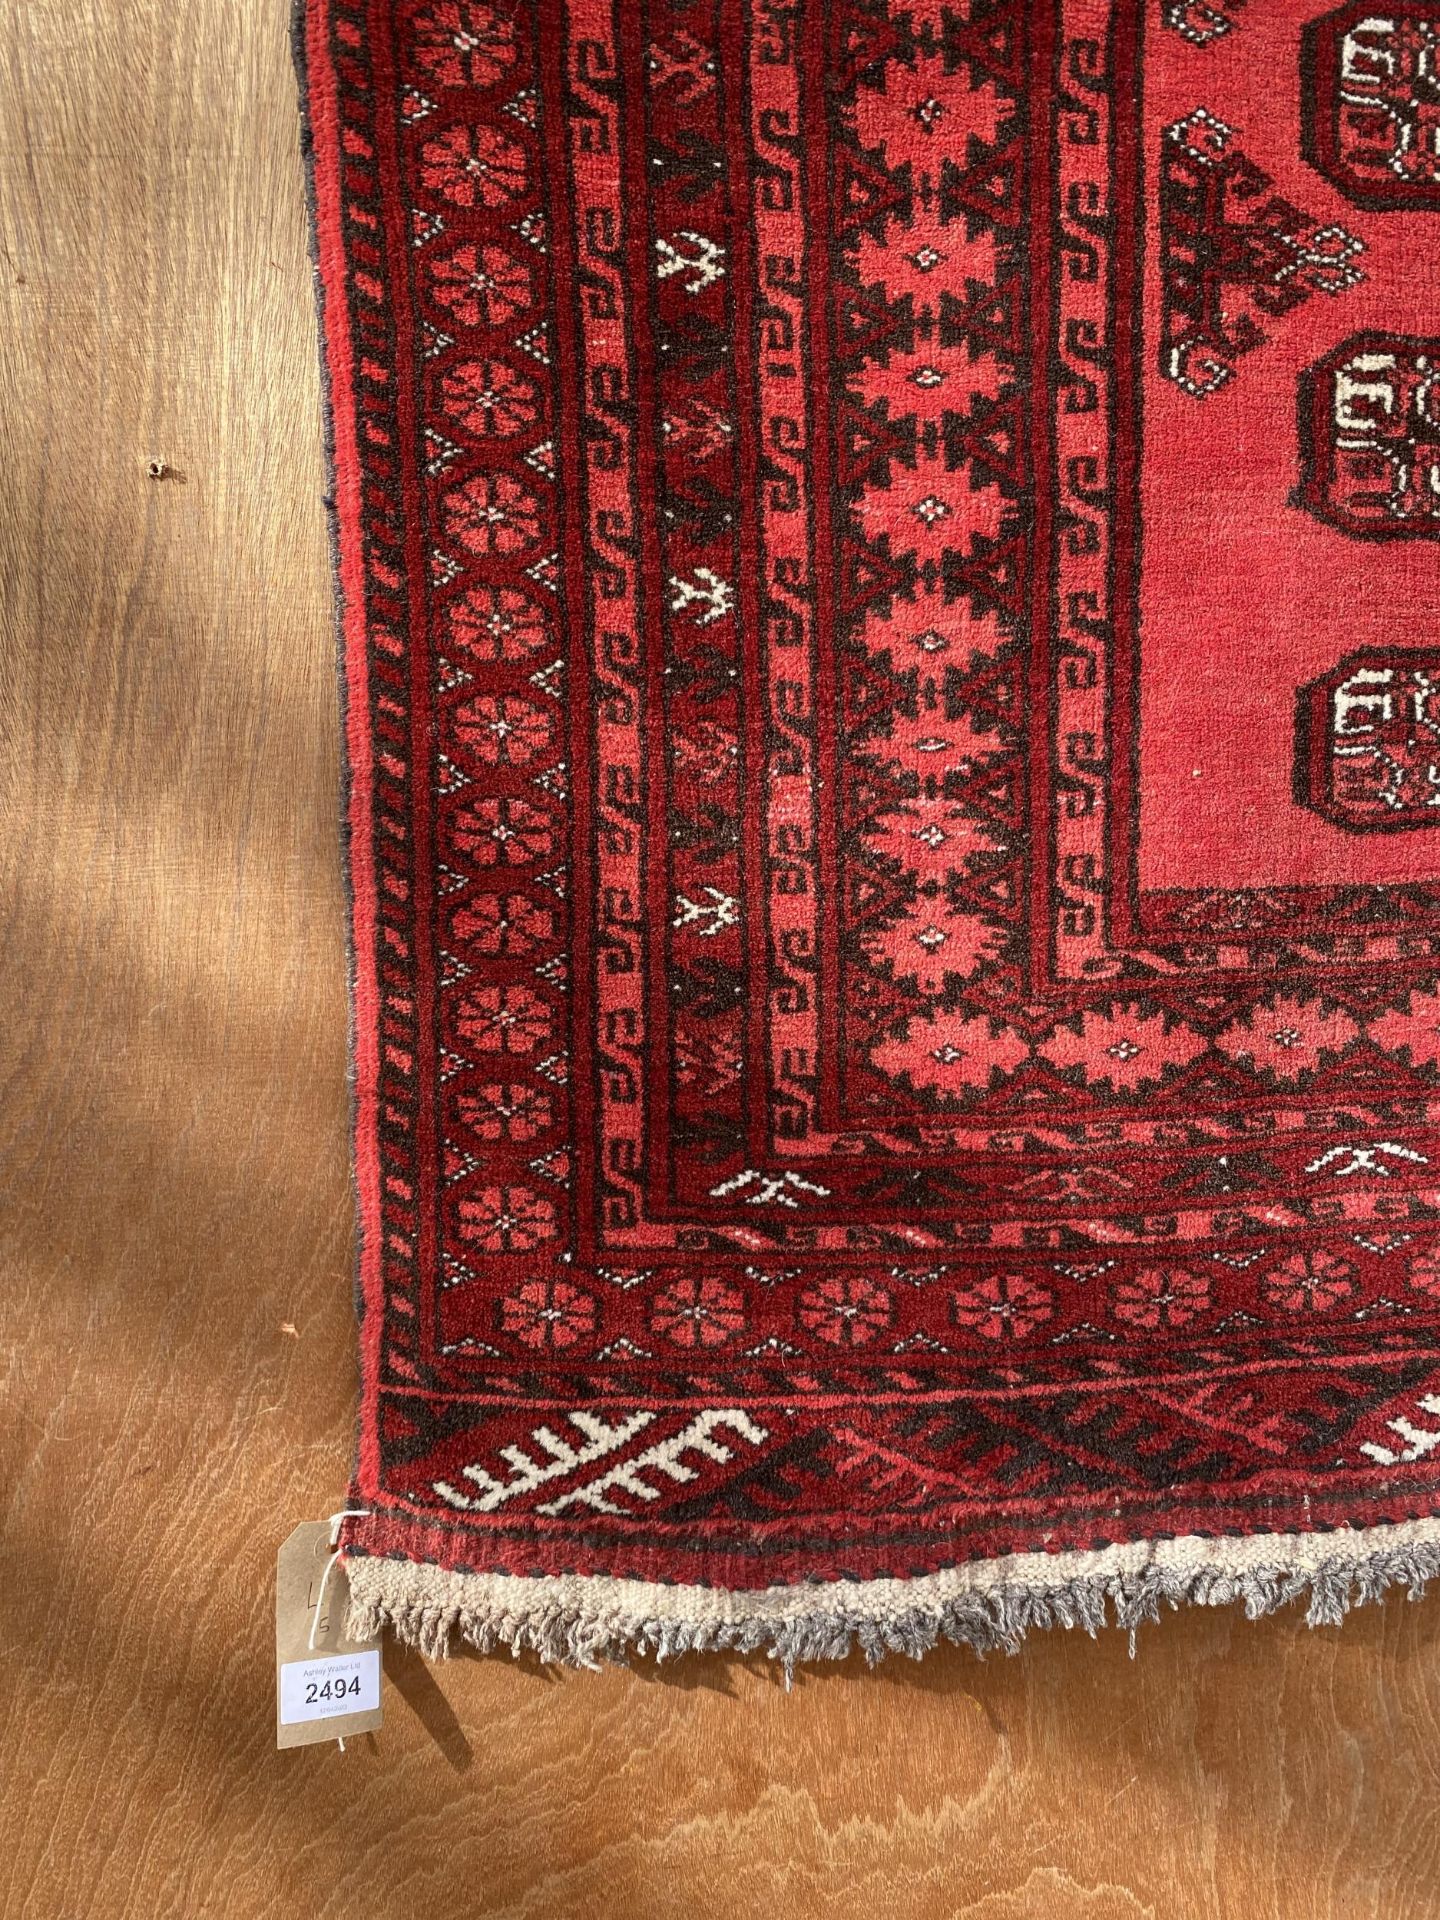 A RED PATTERNED FRINGED RUG (185CM x 107CM) - Image 3 of 3